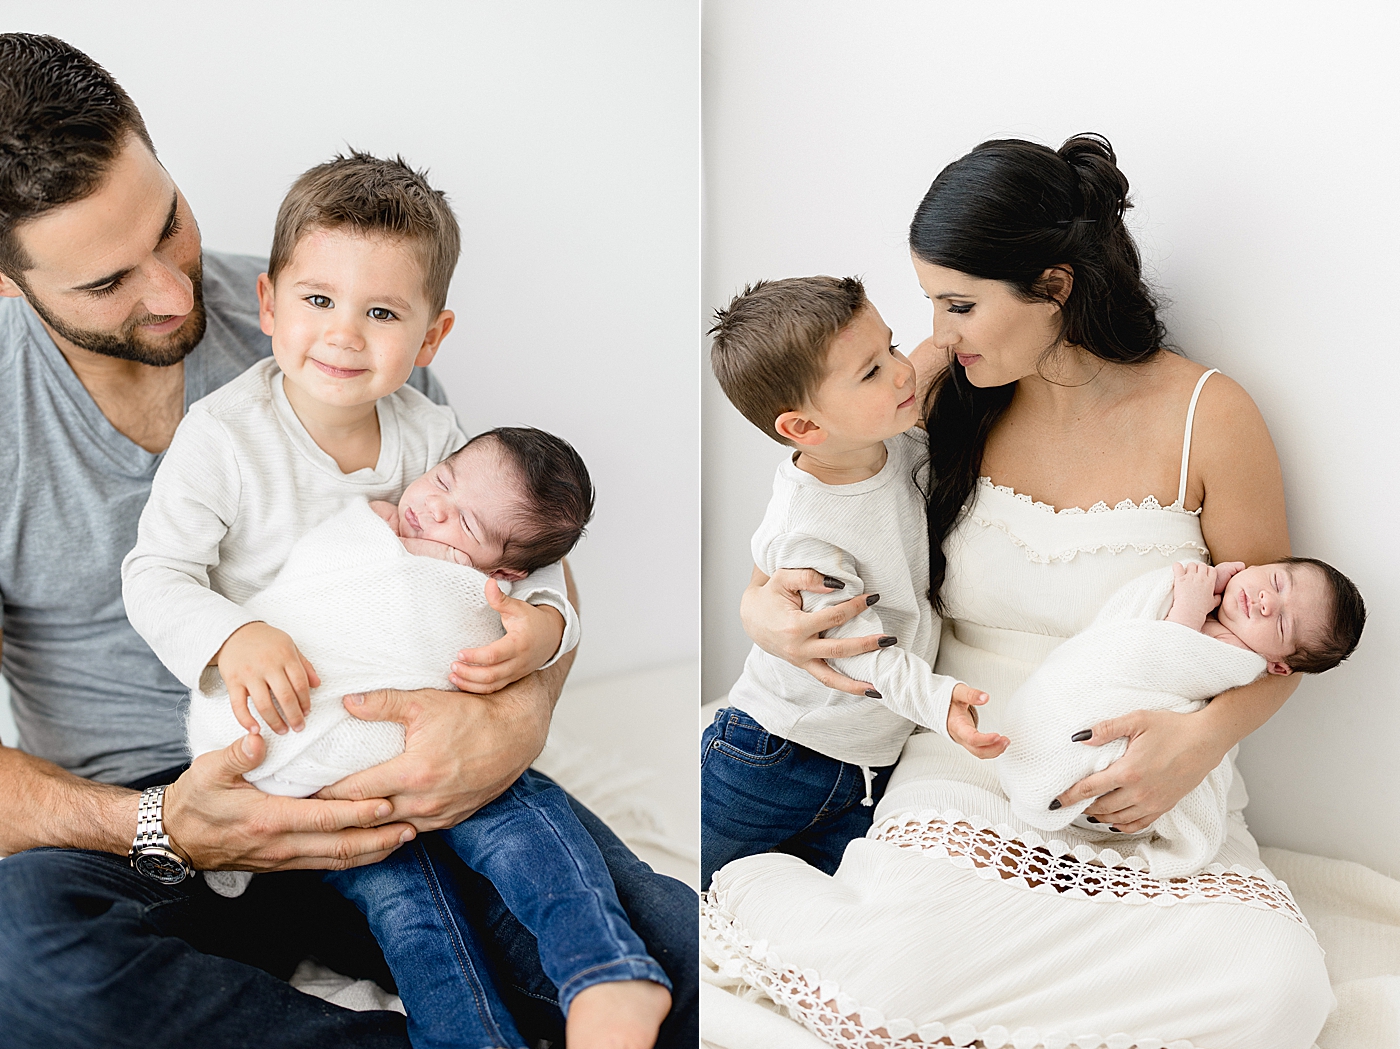 Newborn session in studio with Tampa Newborn Photographer, Brittany Elise Photography.